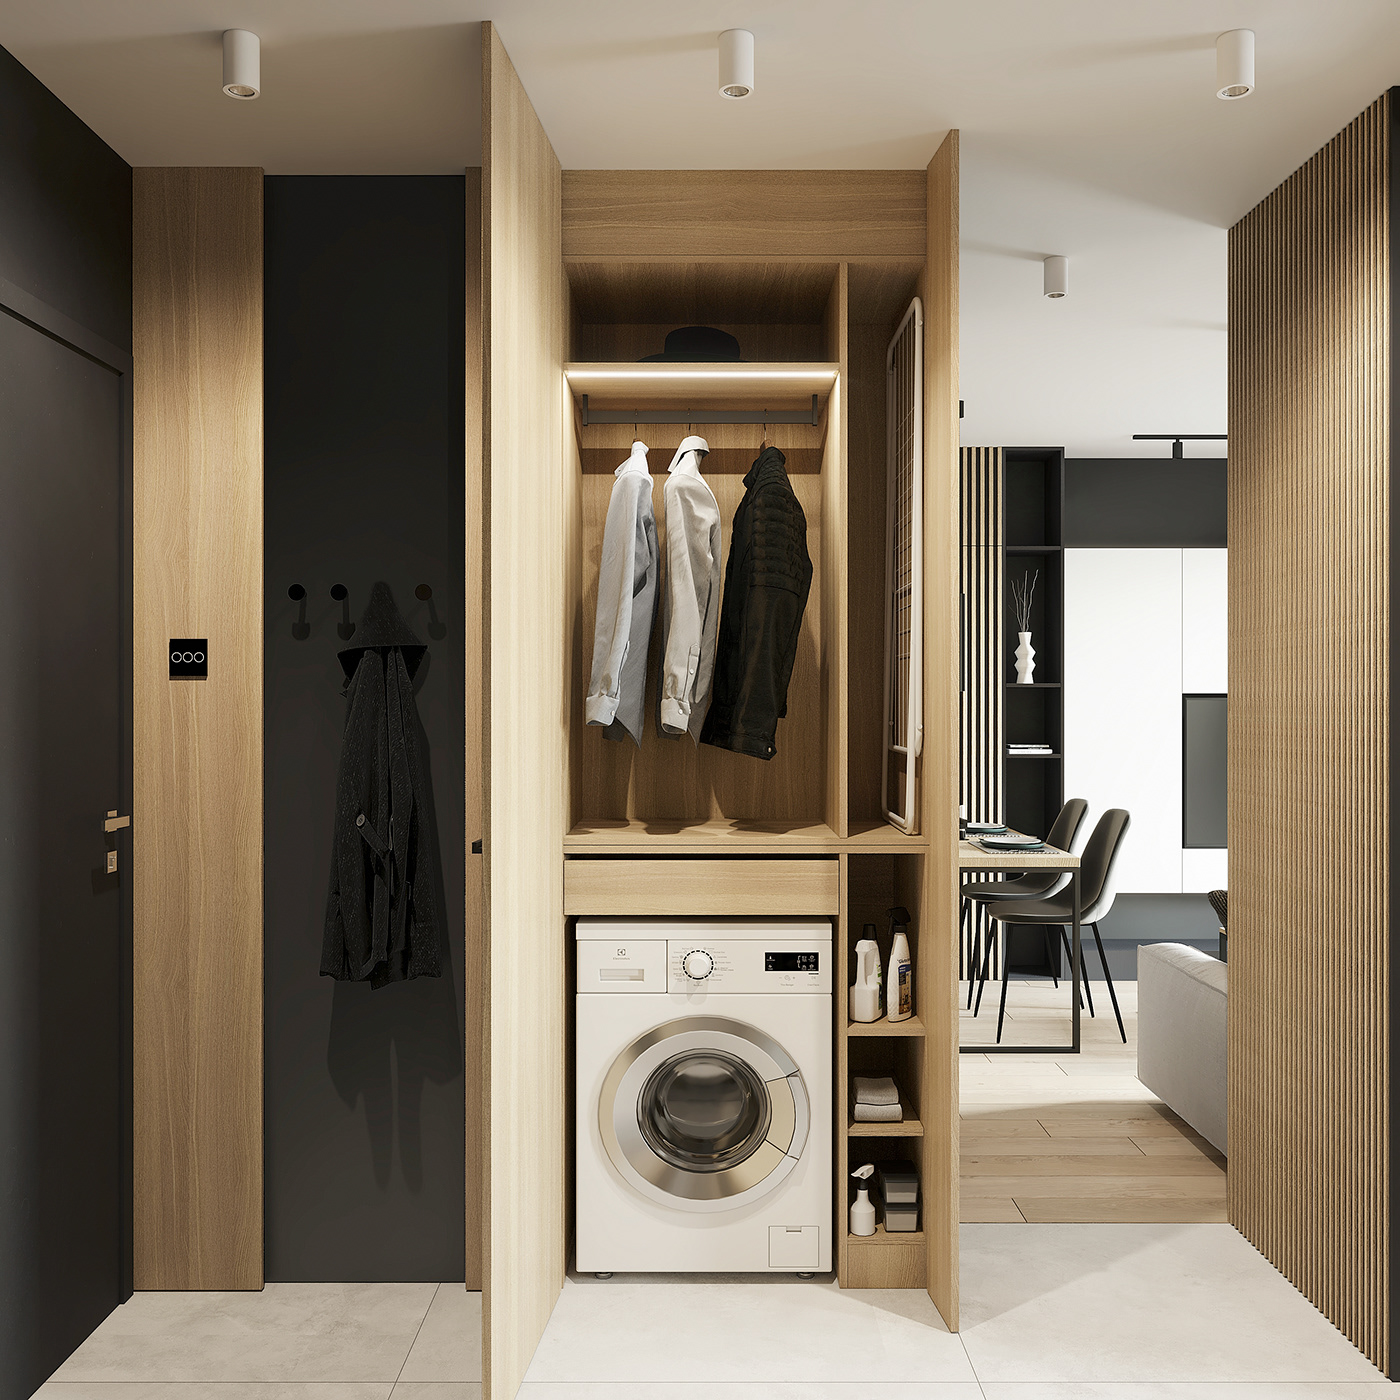 Inside the closet is a place to do laundry and hang clothes, making efficient use of the 40 m2 apartment's space.